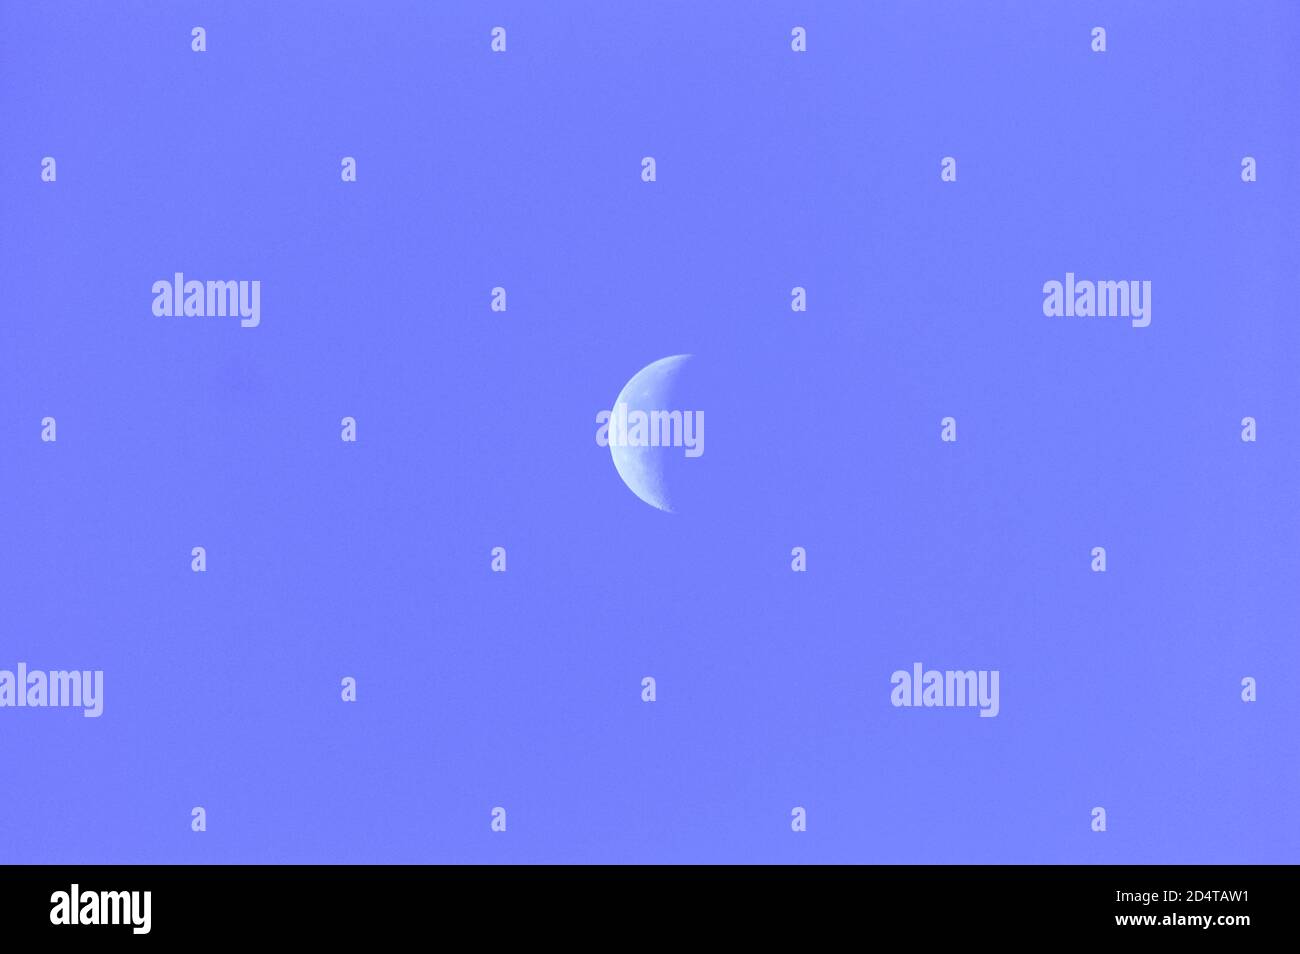 Clear blue sky with waning moon Stock Photo